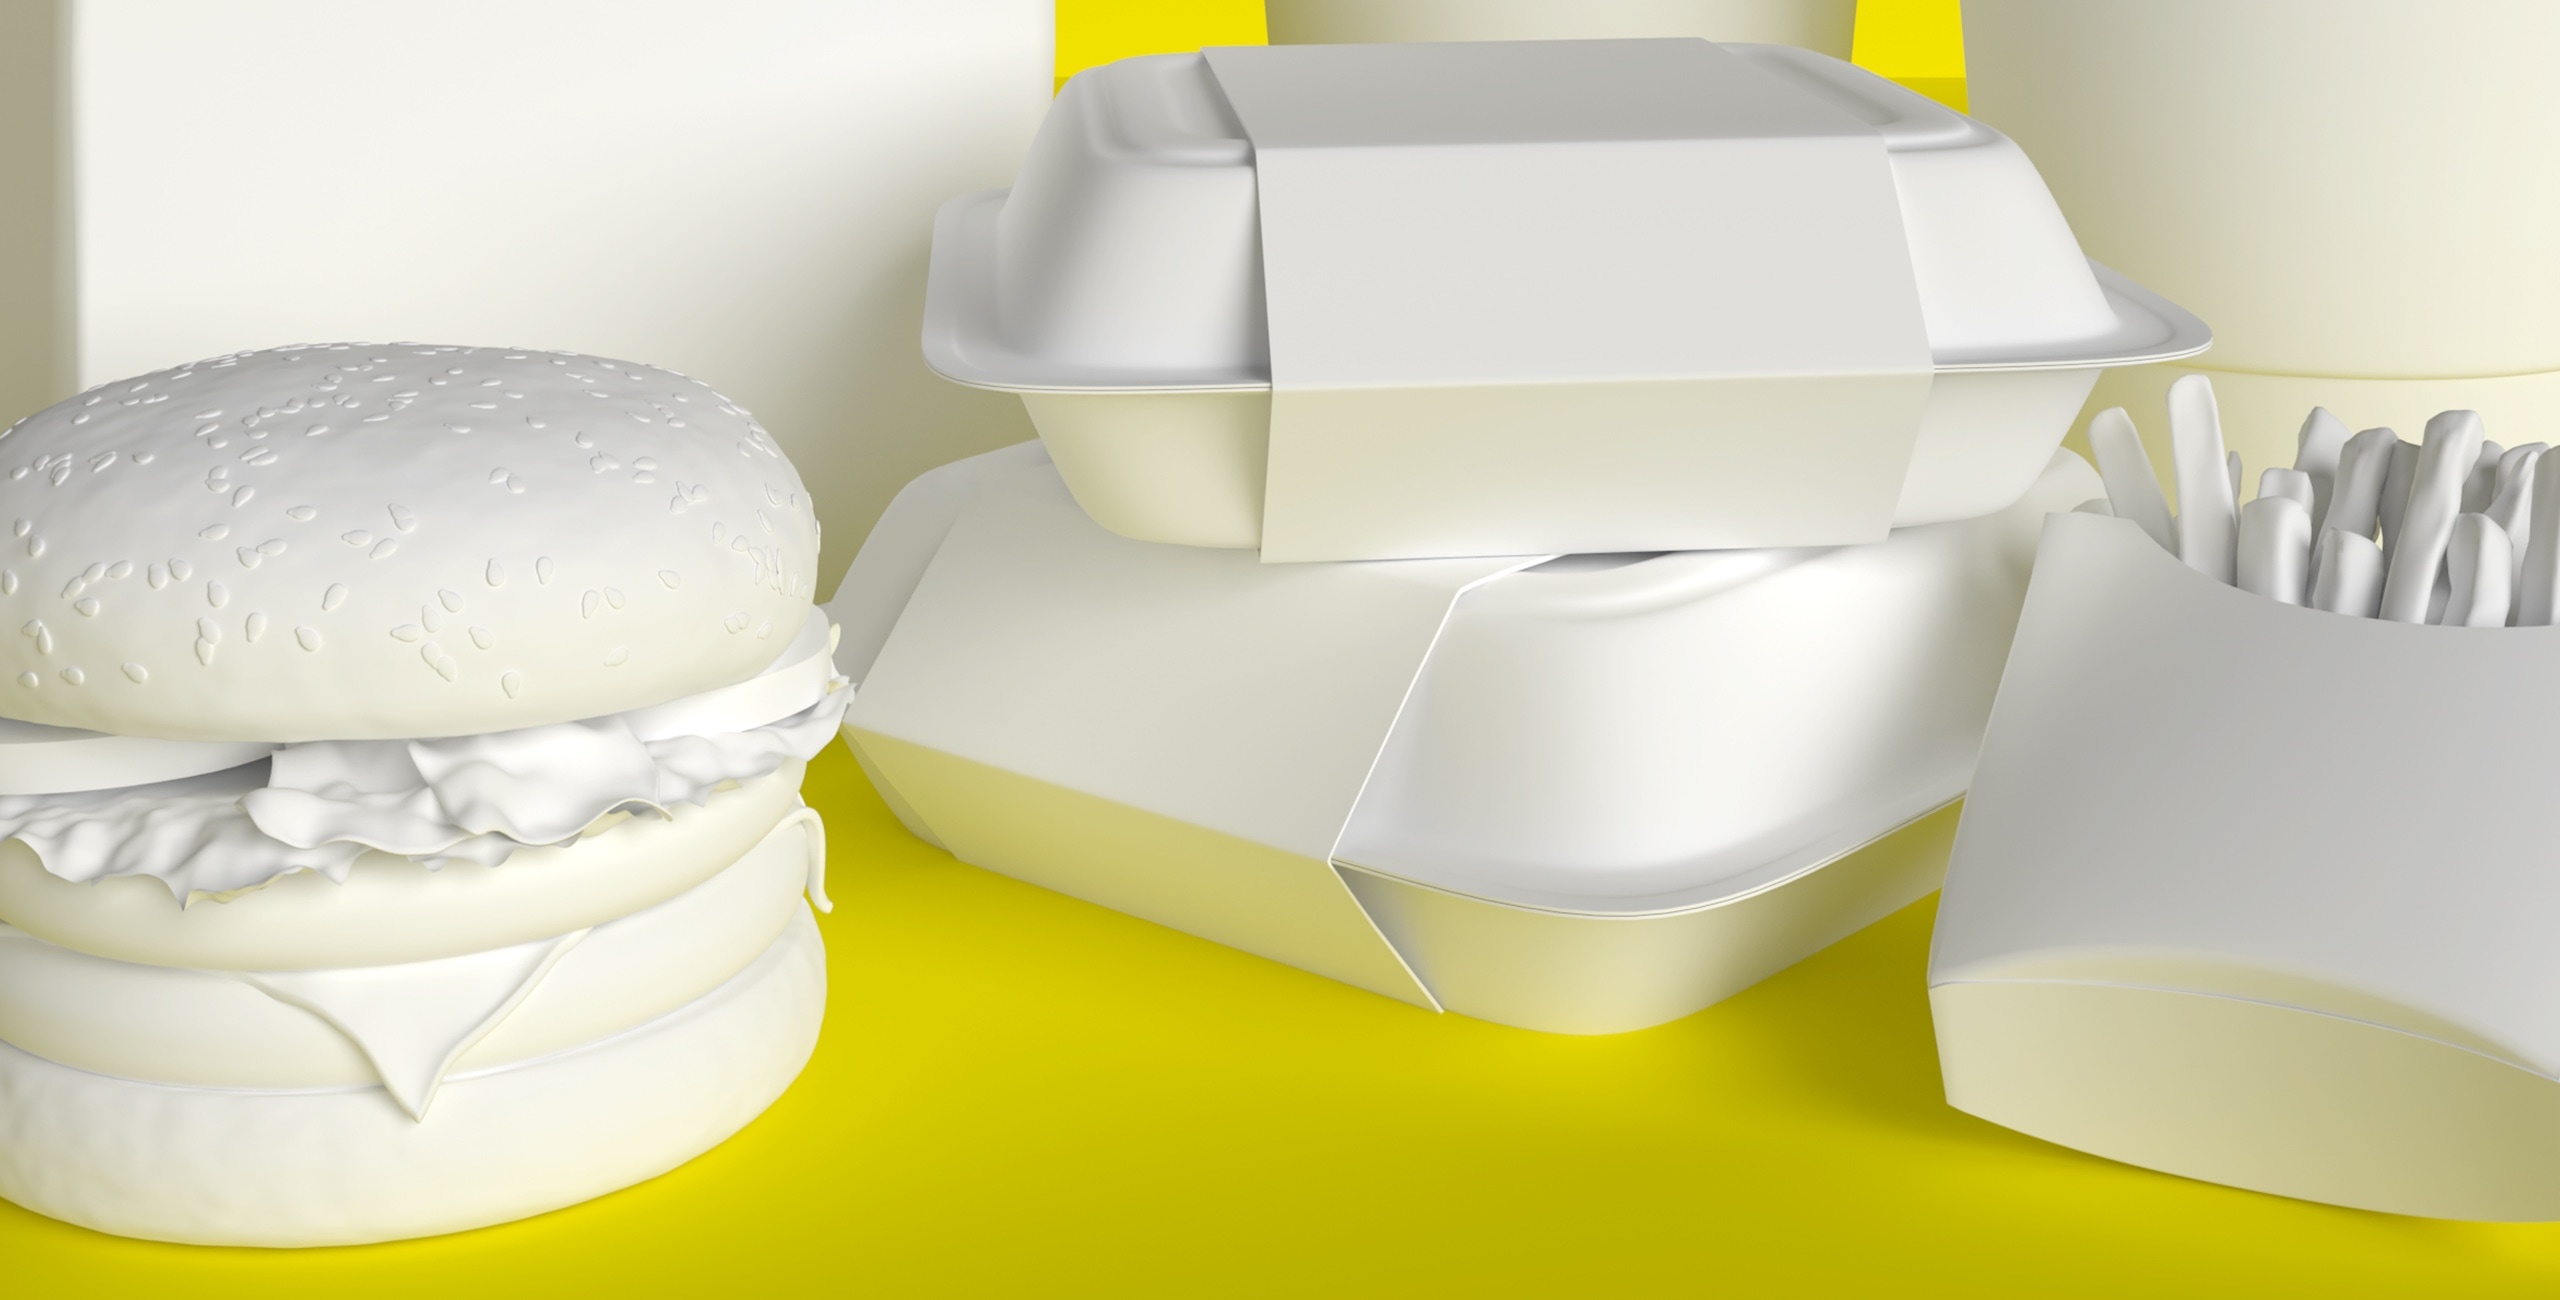 3d model of burgers, fries and condiments.